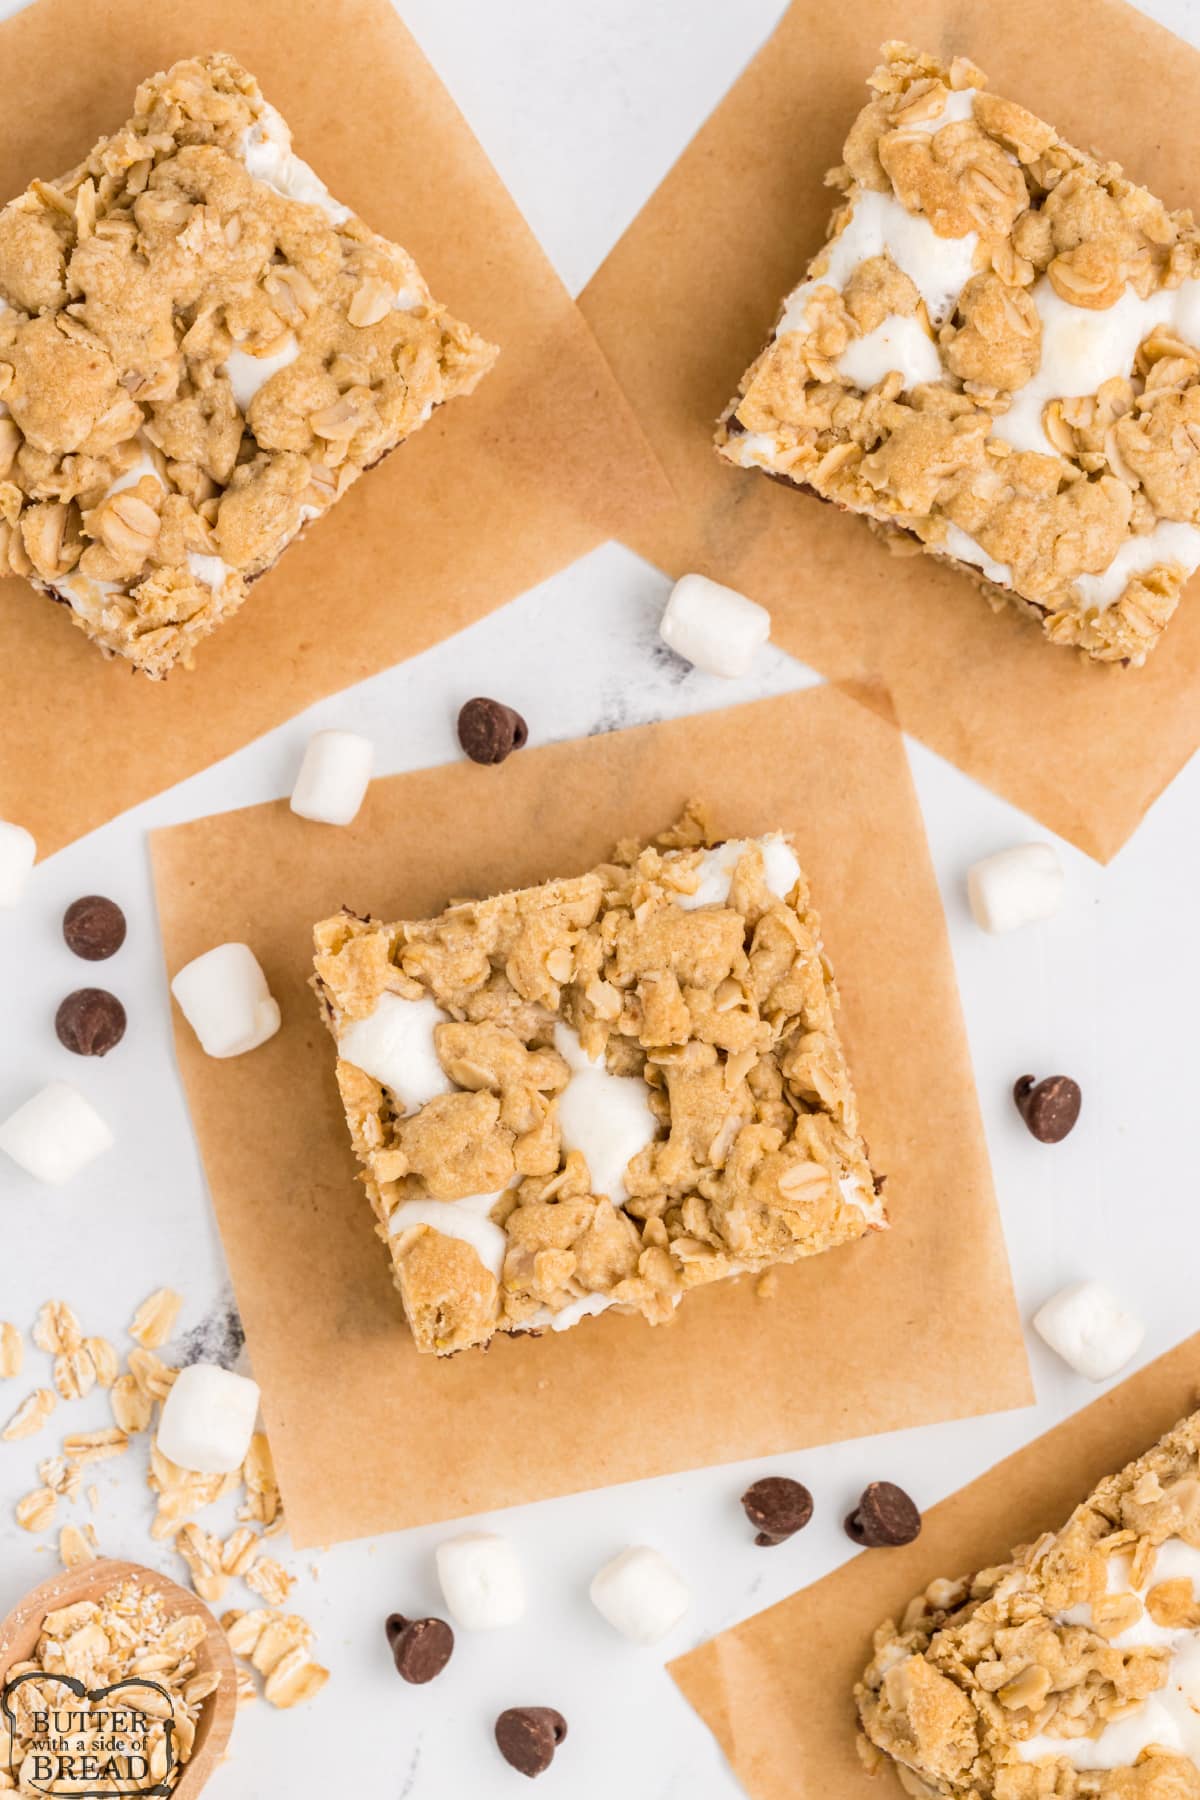 Marshmallow Oatmeal Chocolate Chip Bars are sweet, gooey and absolutely delicious. Marshmallows and chocolate chips are layered between two layers of a simple oatmeal cookie crust. 